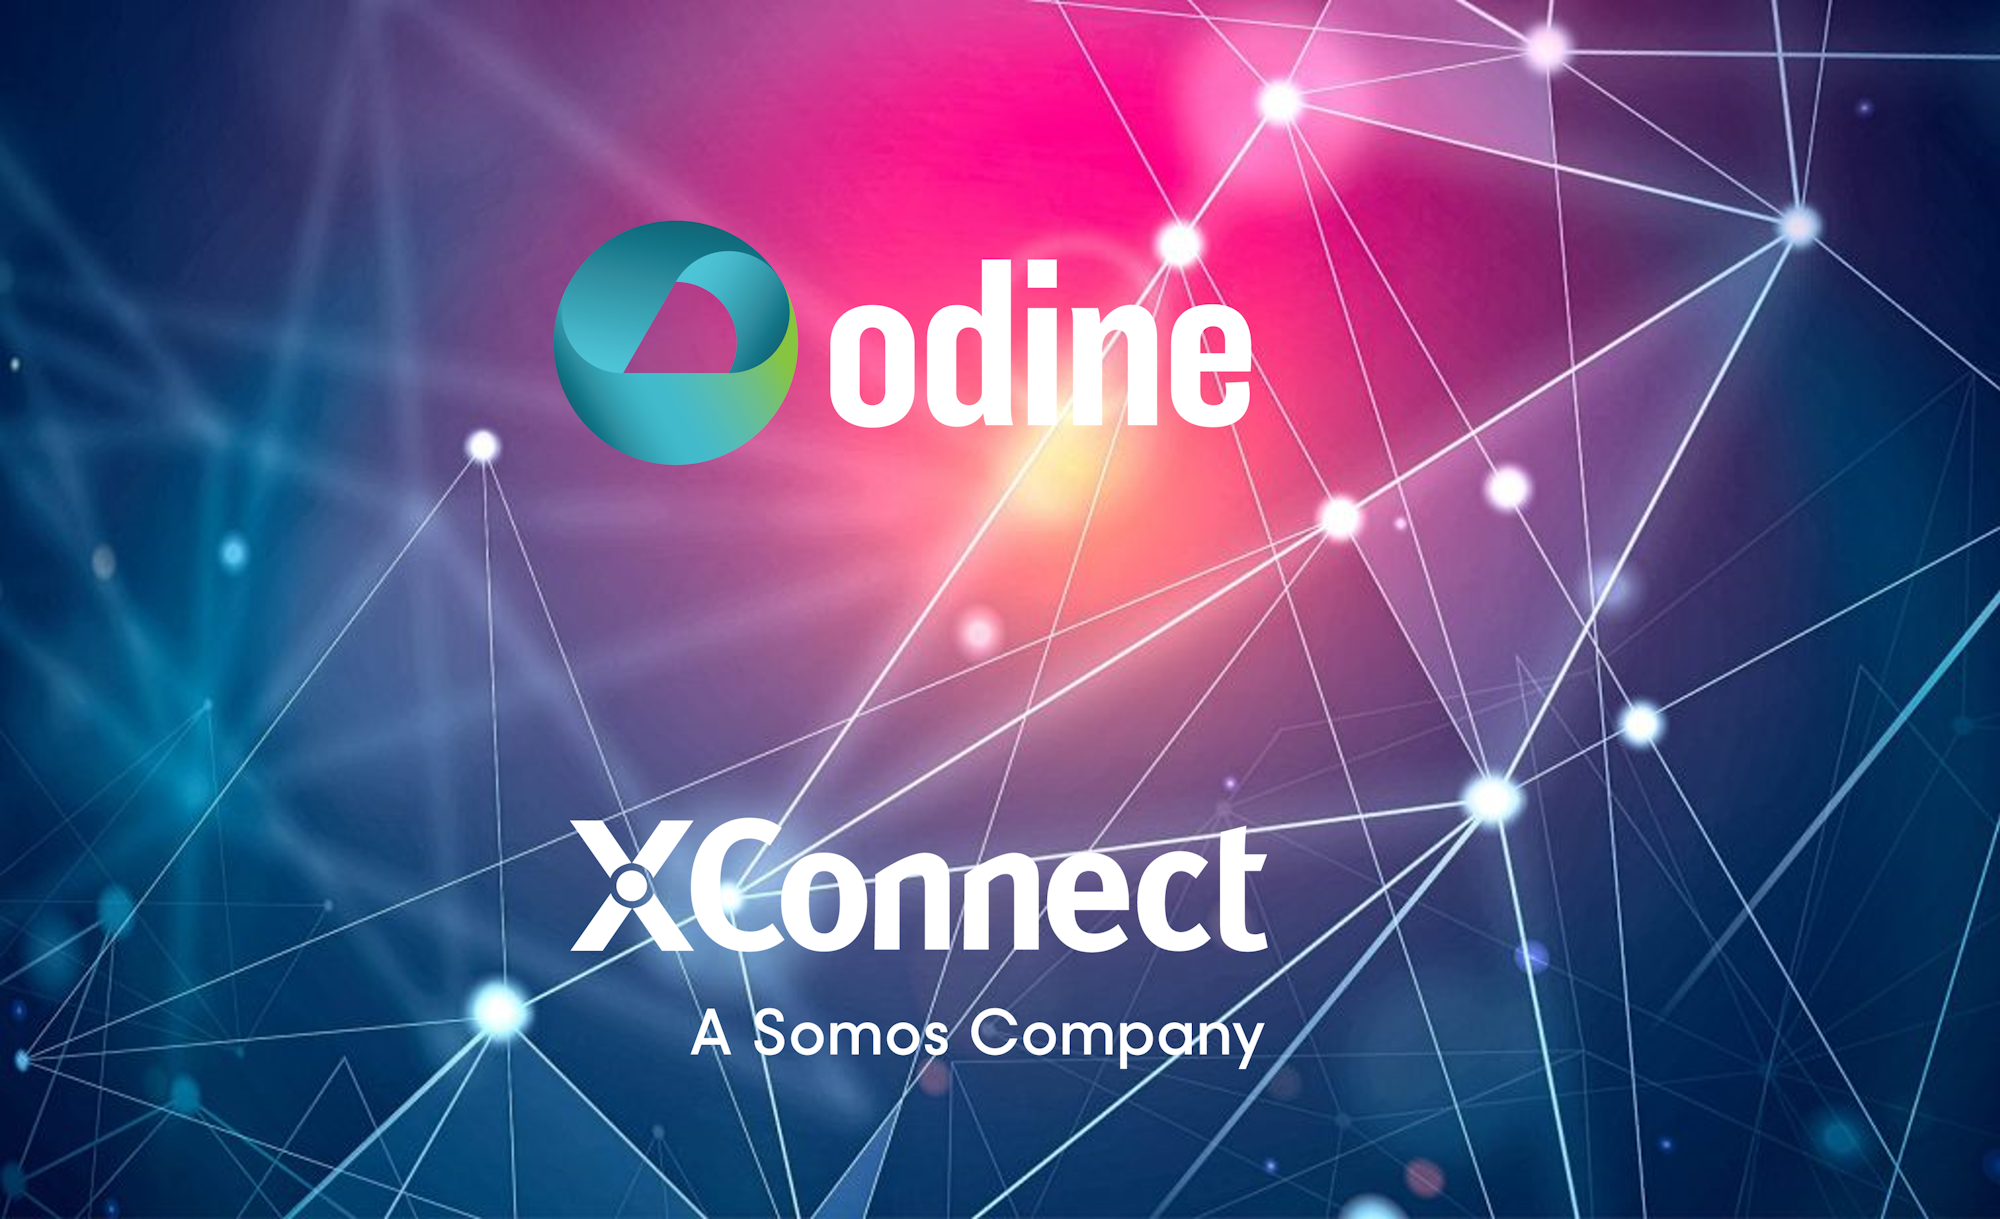 XConnect Partners with Odine Solutions to Increase Carrier Profitability with Global Number Intelligence